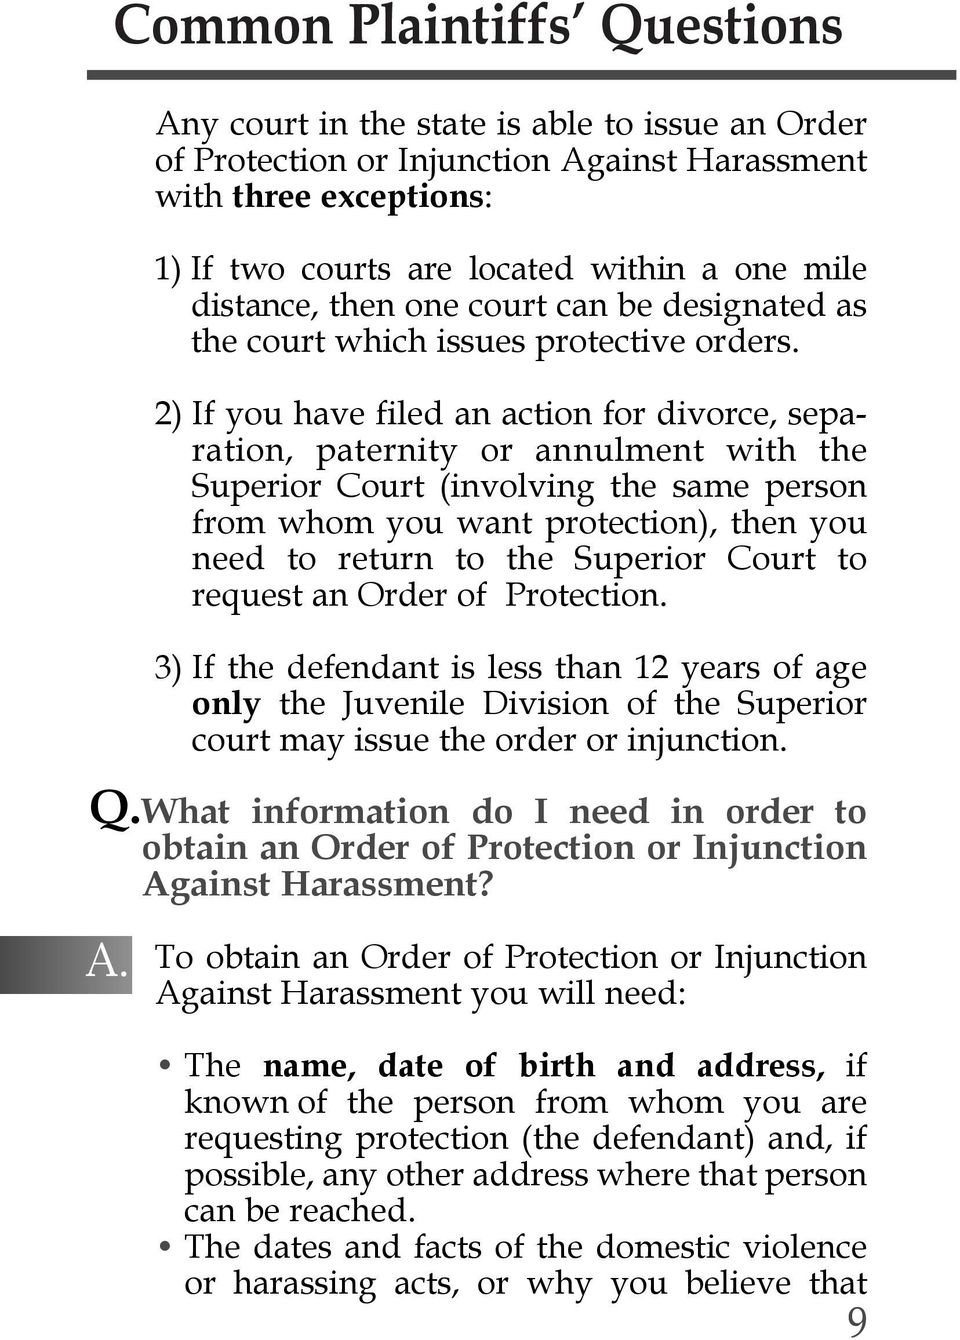 2) If you have filed an action for divorce, separation, paternity or annulment with the Superior Court (involving the same person from whom you want protection), then you need to return to the